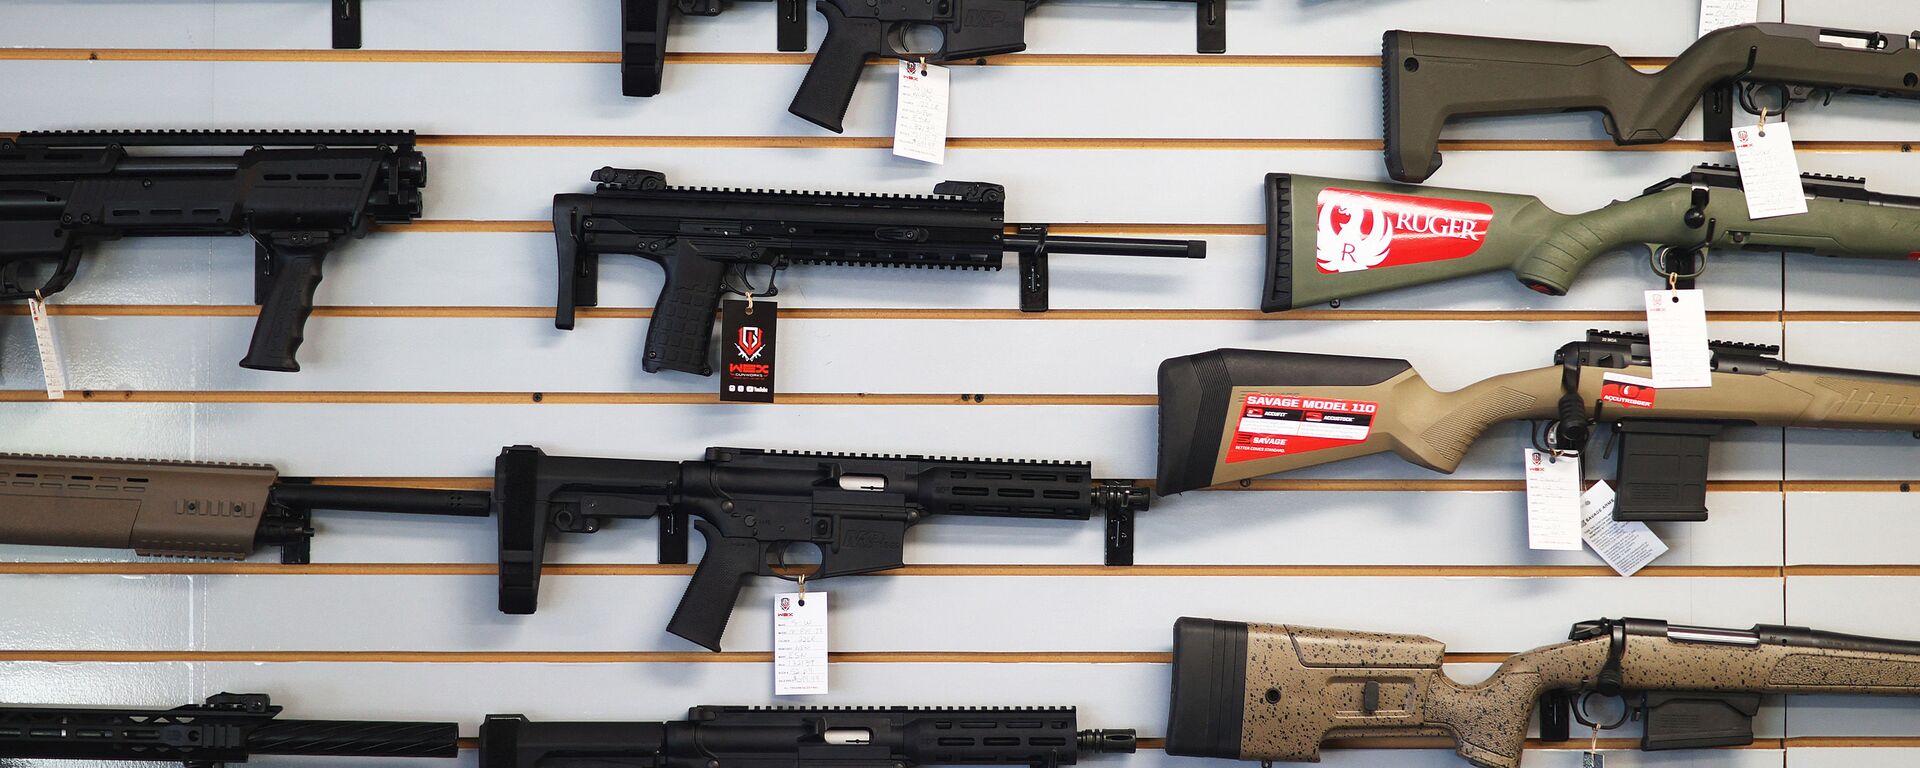 DELRAY BEACH, FLORIDA - MARCH 24: Weapons for sale hang on the wall at WEX Gunworks on March 24, 2021 in Delray Beach, Florida. U.S. President Joe Biden has called on lawmakers to “immediately pass” legislation to help curb gun violence in the county.   - Sputnik International, 1920, 23.11.2023